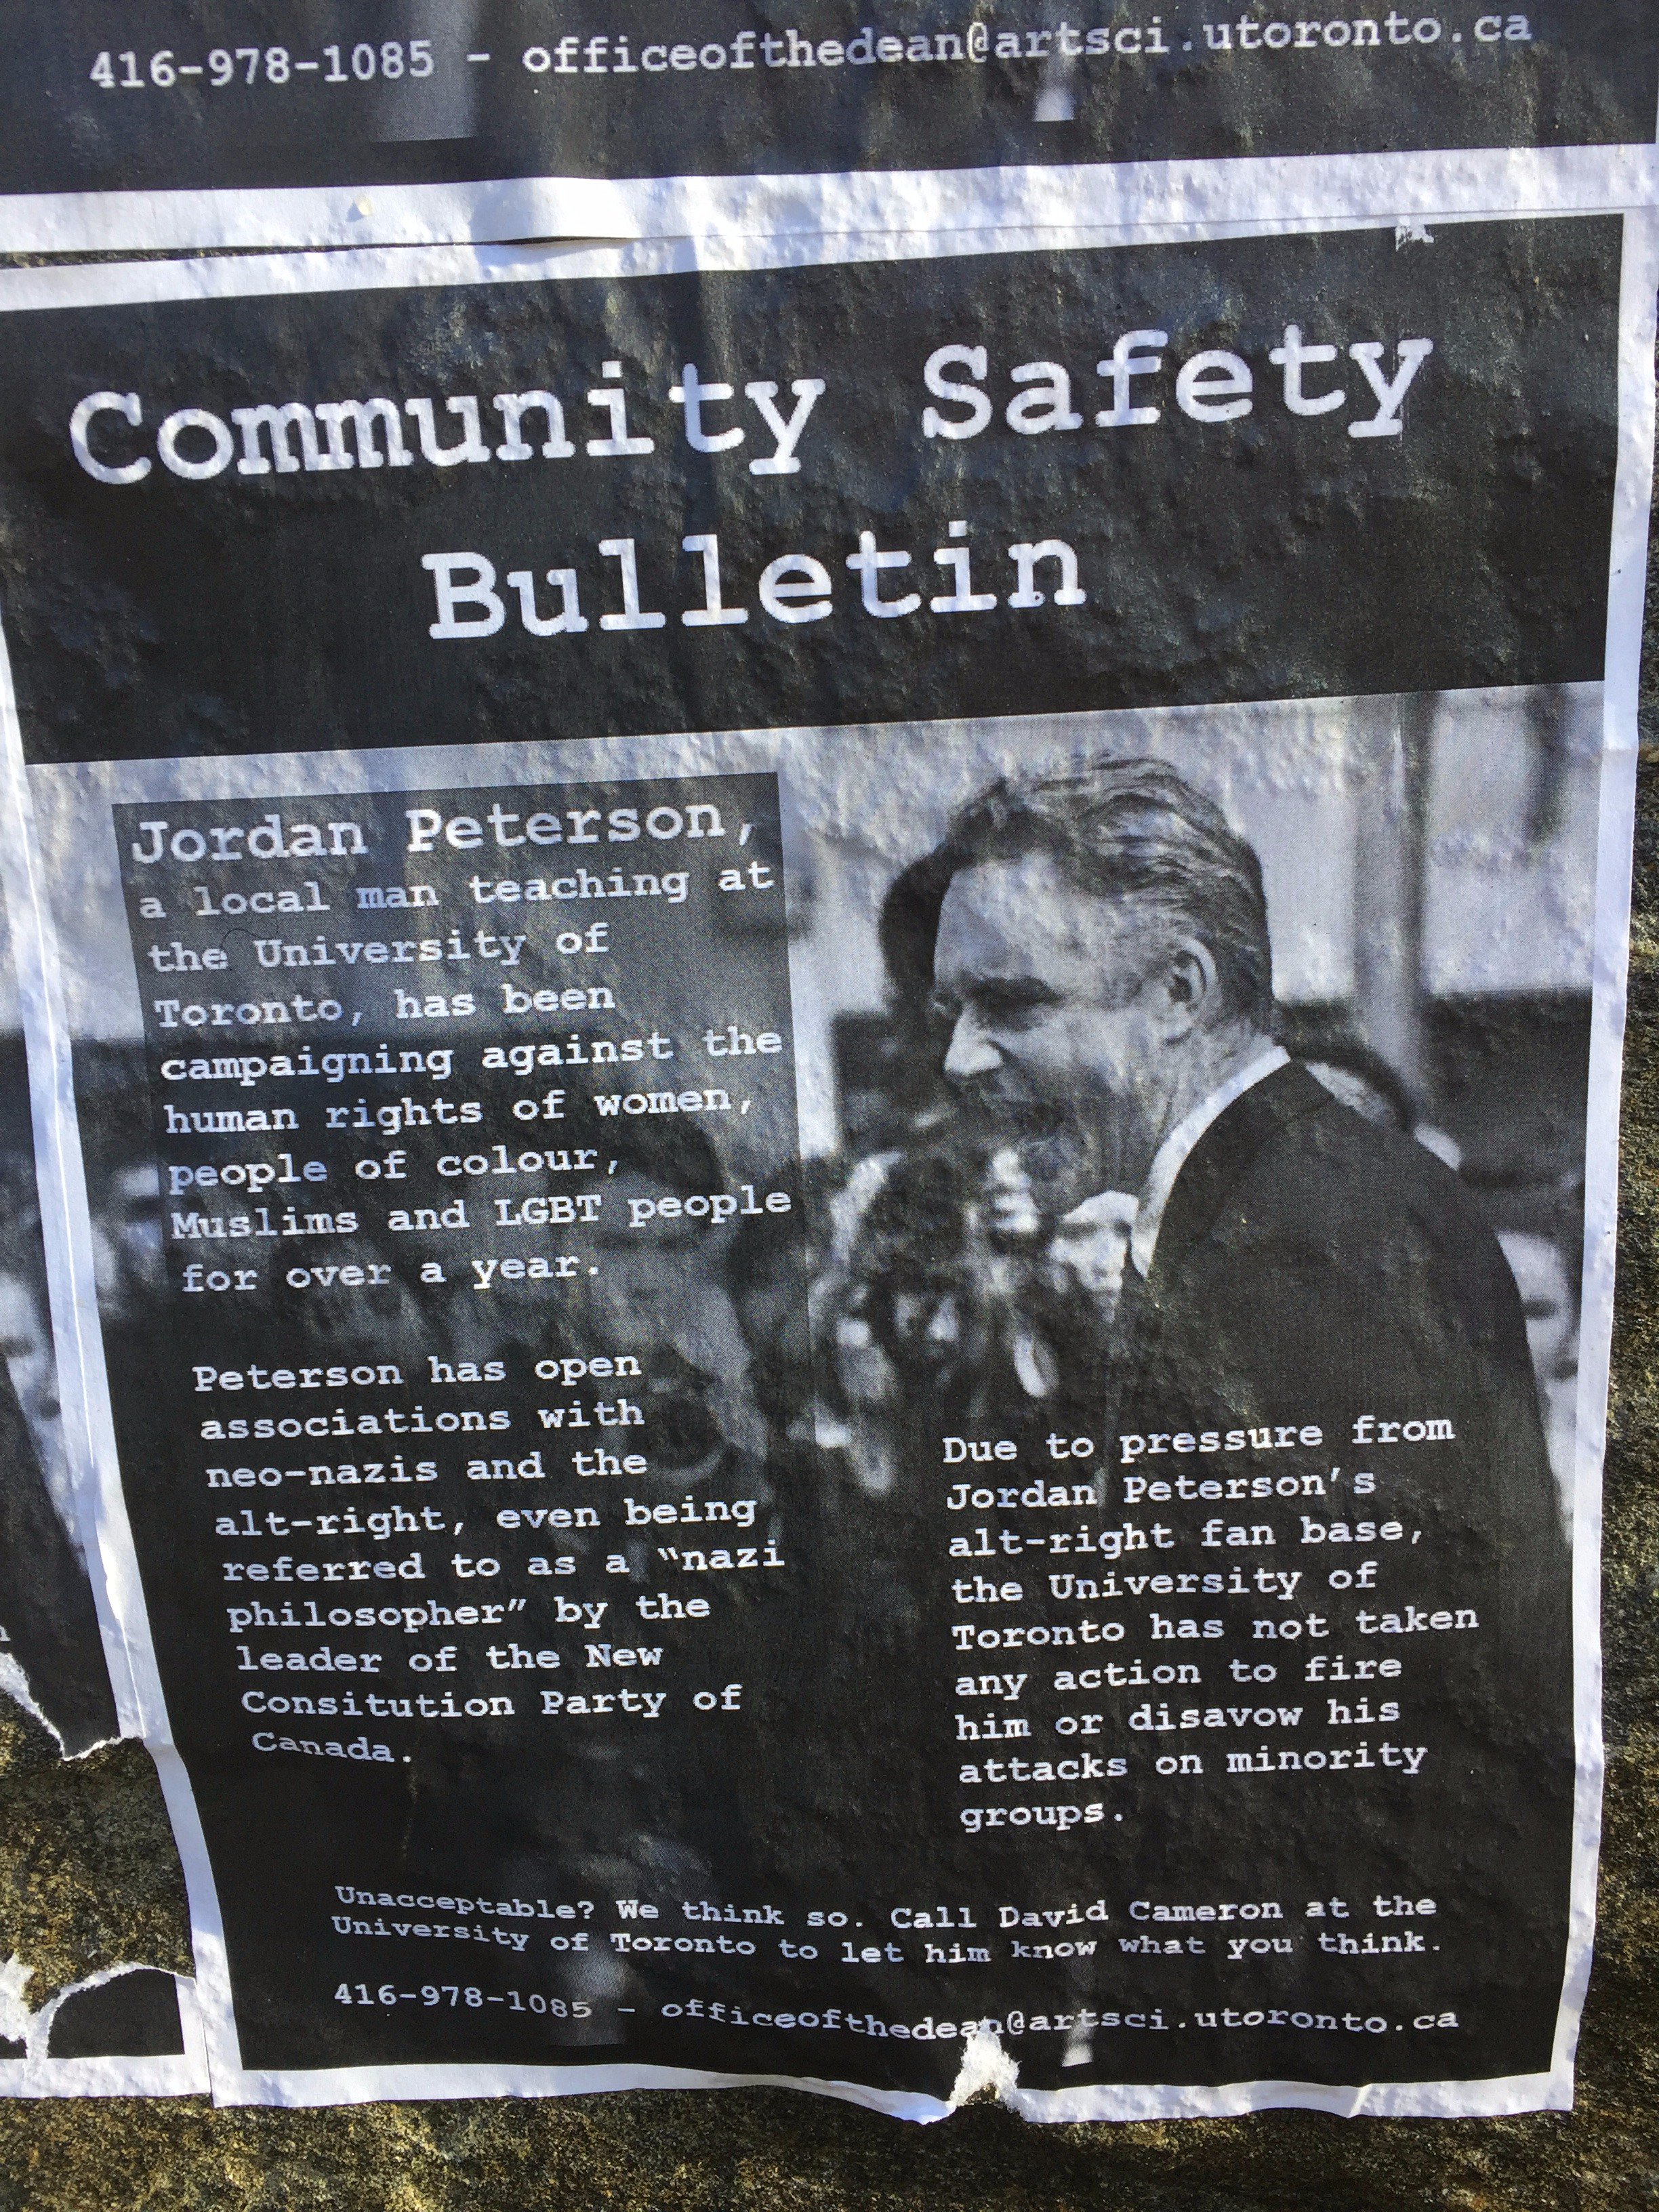 Jordan B Peterson on Twitter: "Those who consider themselves my enemies have been posting these all around my home neighbourhood. https://t.co/zF3Mc7Imsy" / Twitter